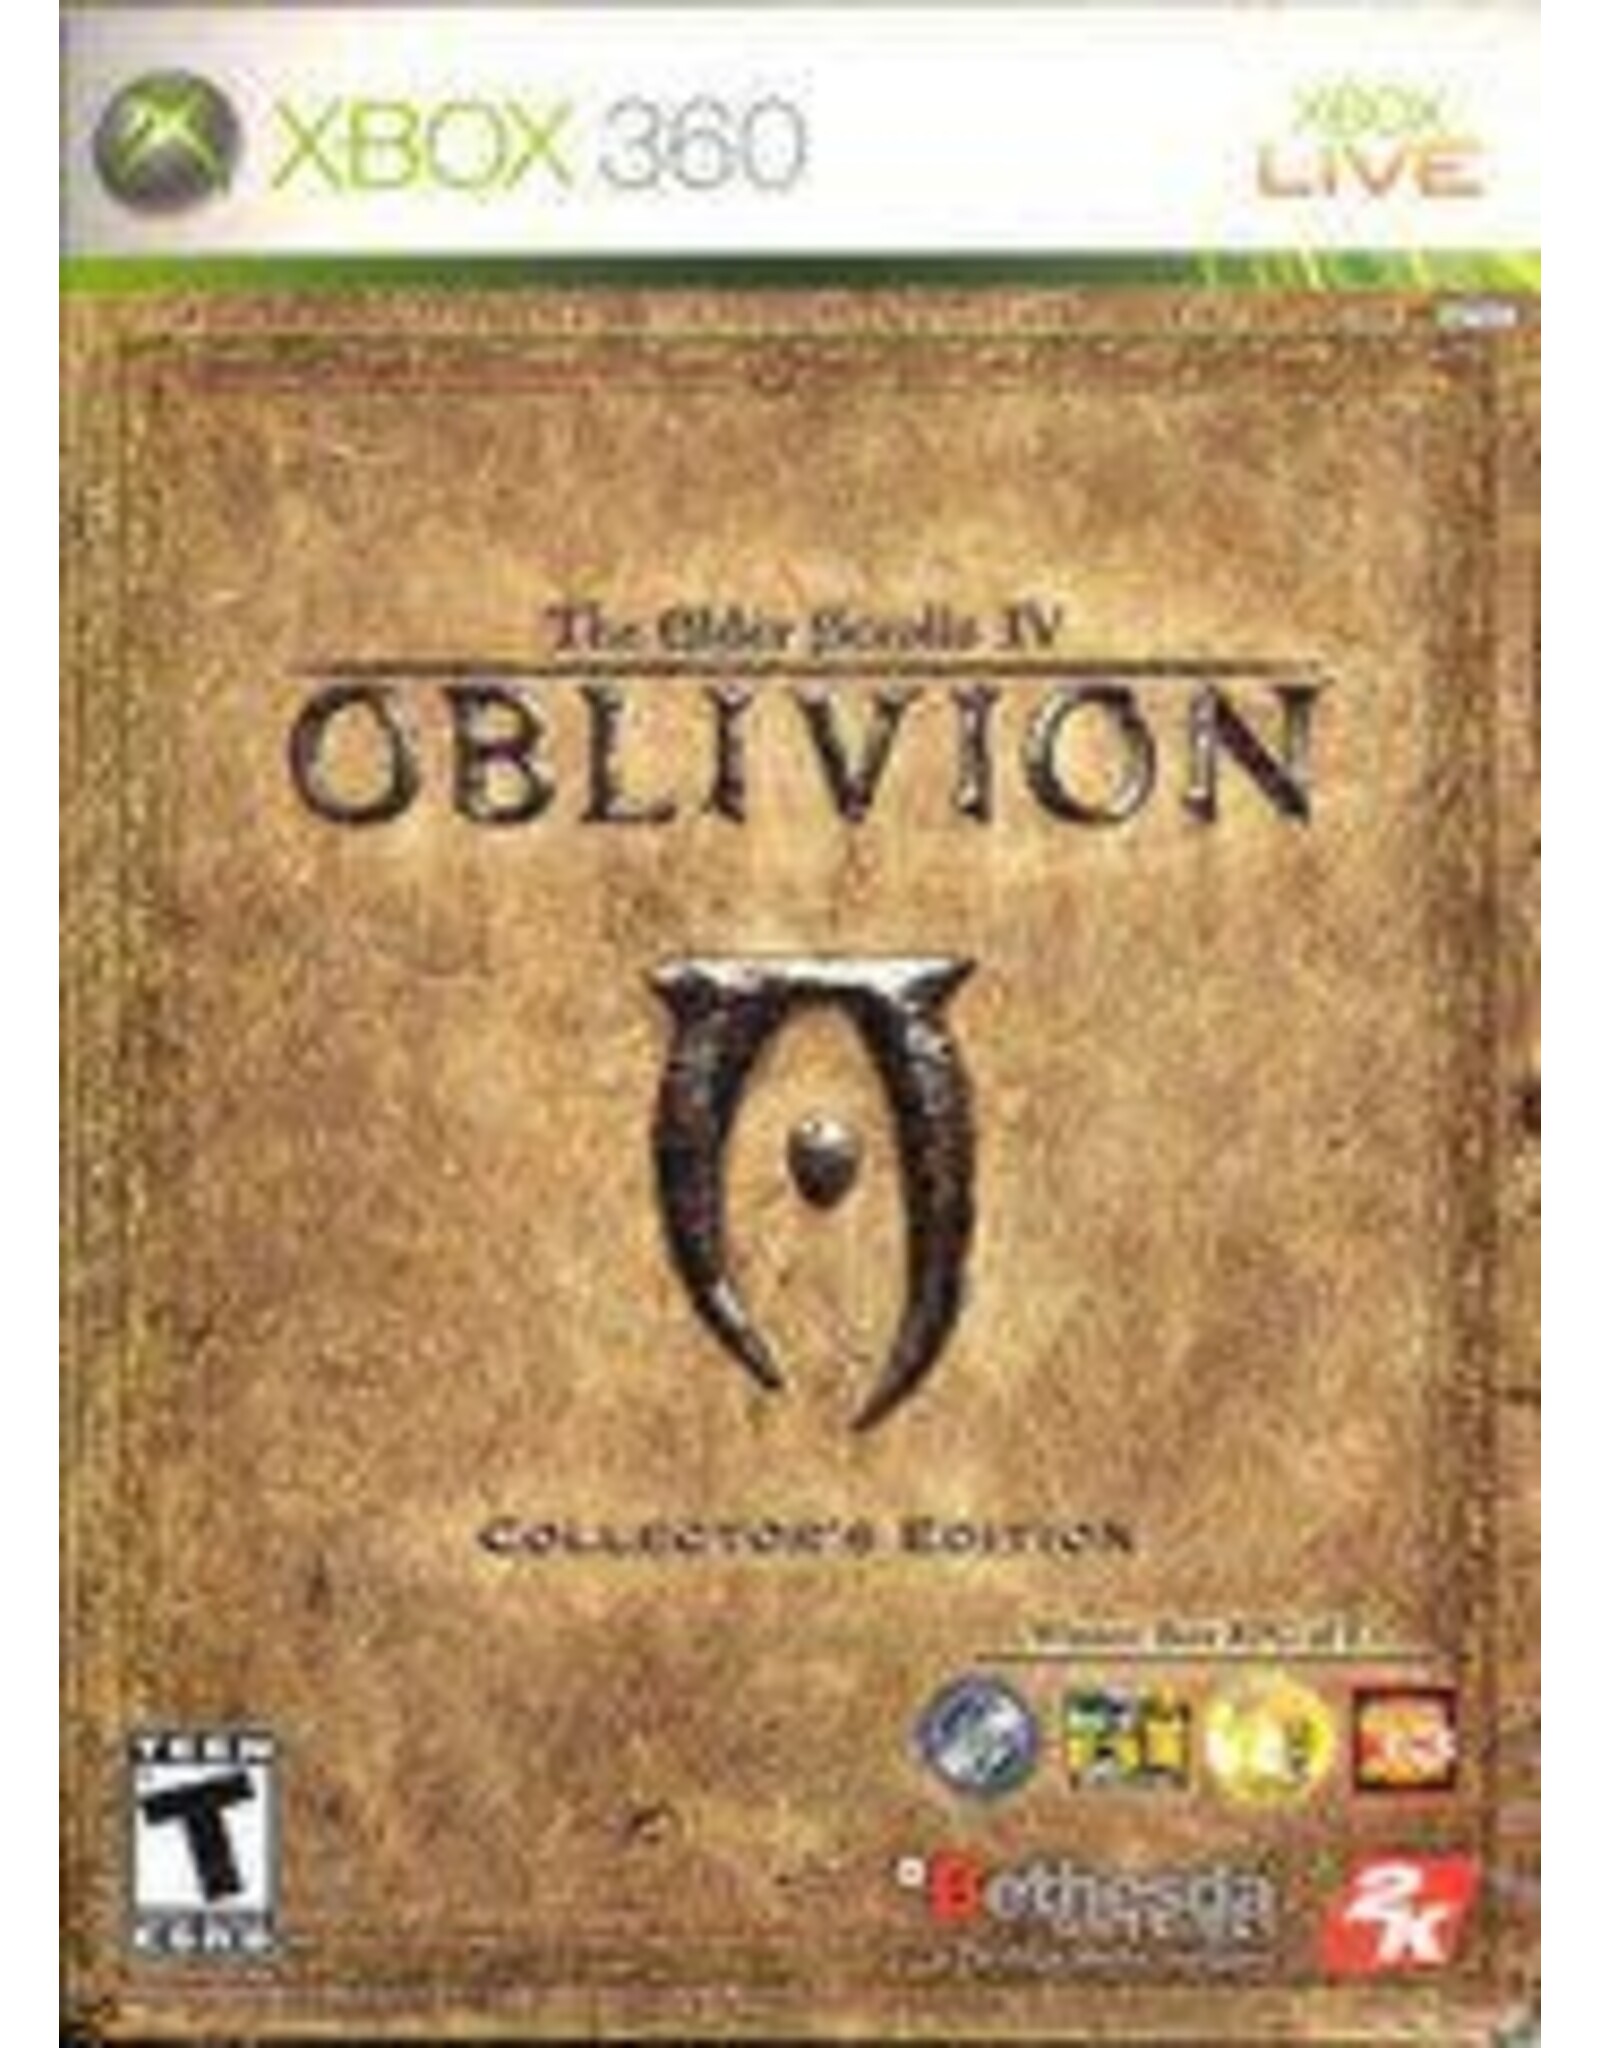 Xbox 360 Oblivion, Elder Scrolls IV Collector's Edition (CiB with Coin, Damaged Outer Box)